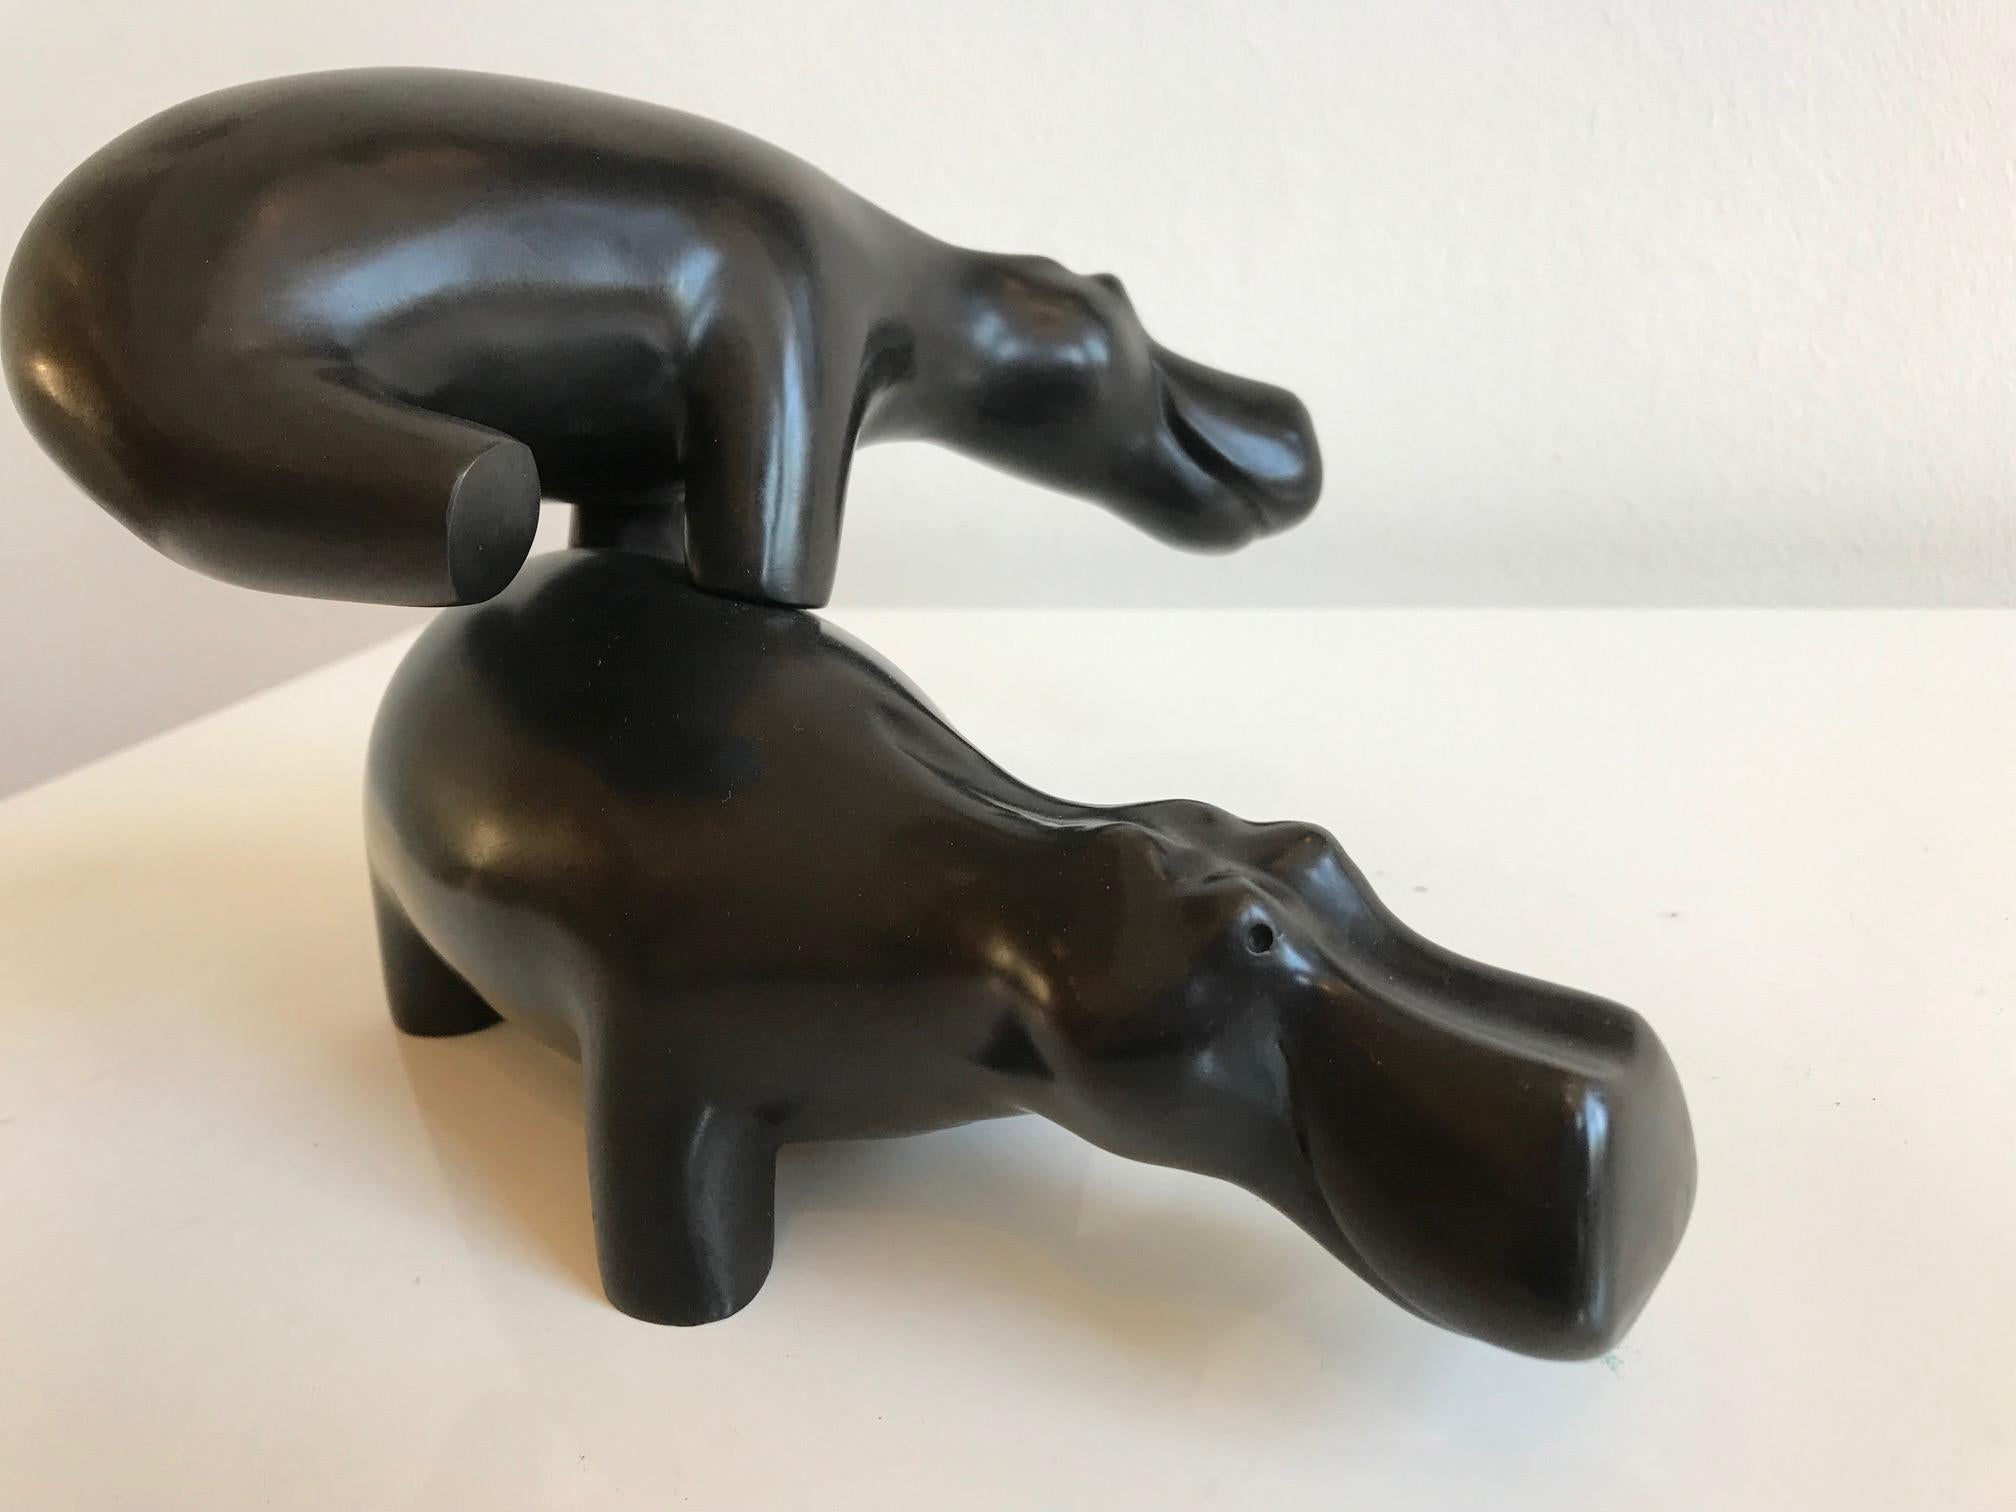 The optimistic bronze sculptures of Dutch artist Miep Maarse (1945) are a feast for the eyes. Dancing elephants, bathing hippos and playing bears characterize her oeuvre. The images are optimistic in tone and message. Through her images she shows us